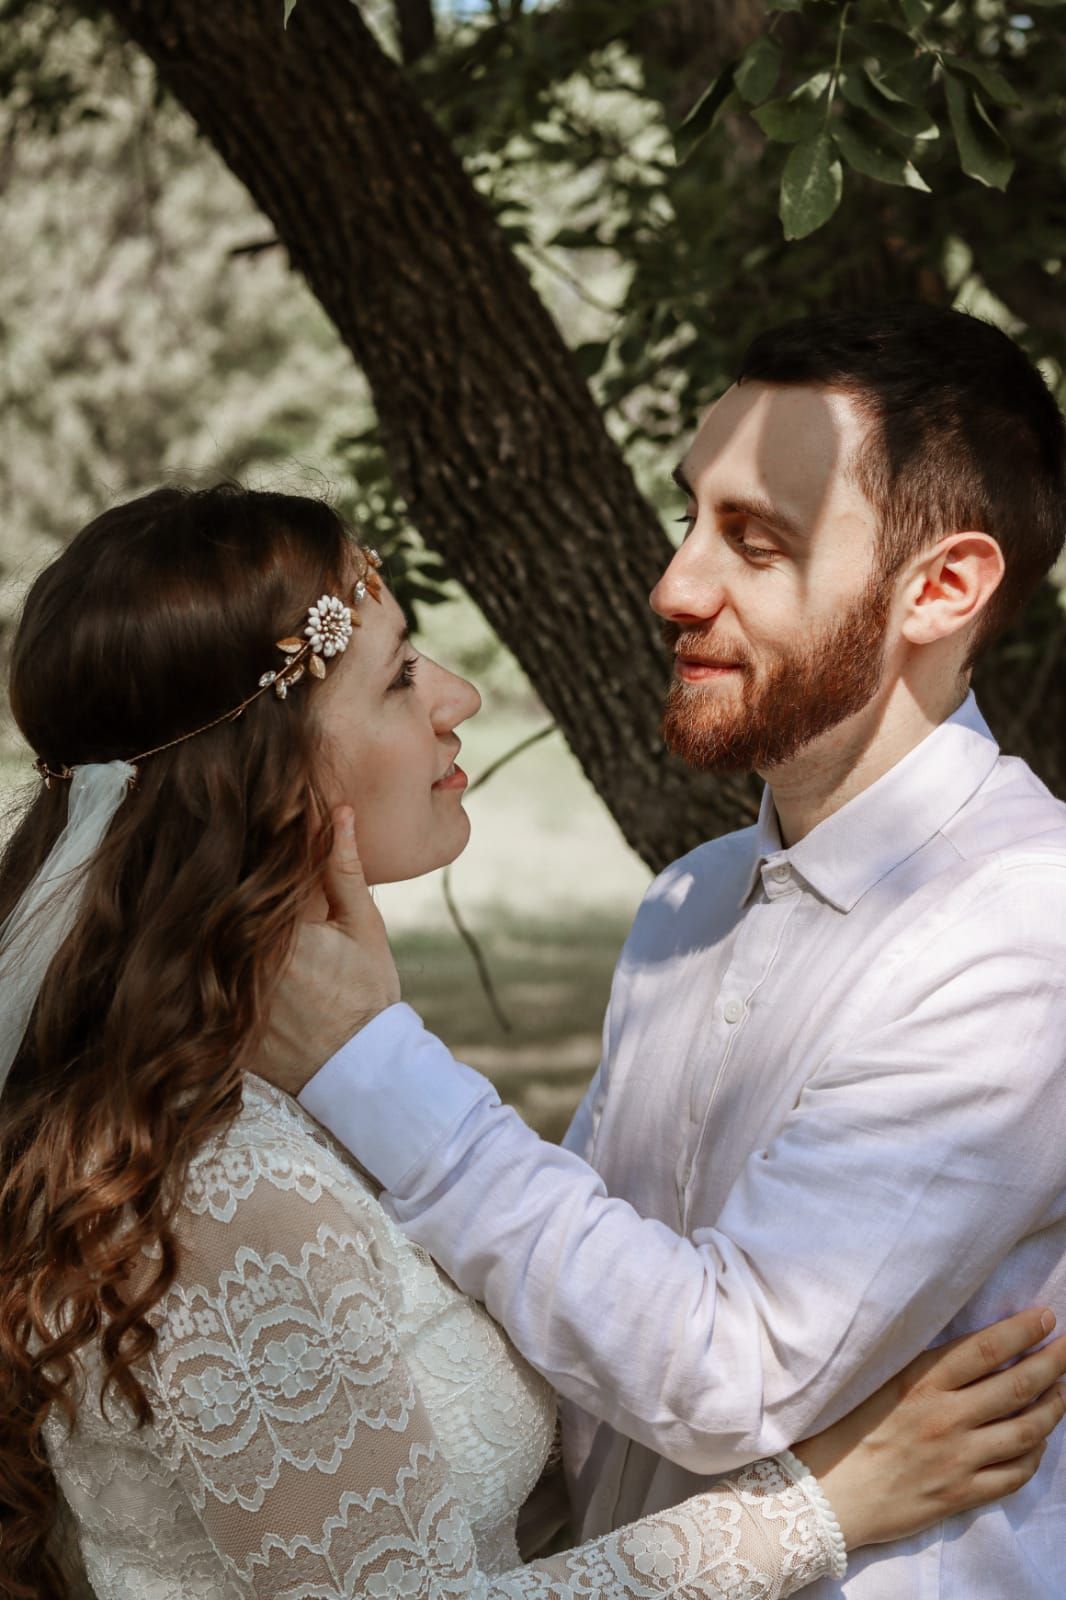 Young Christian couple gaze into each other's eyes in outdoor wedding